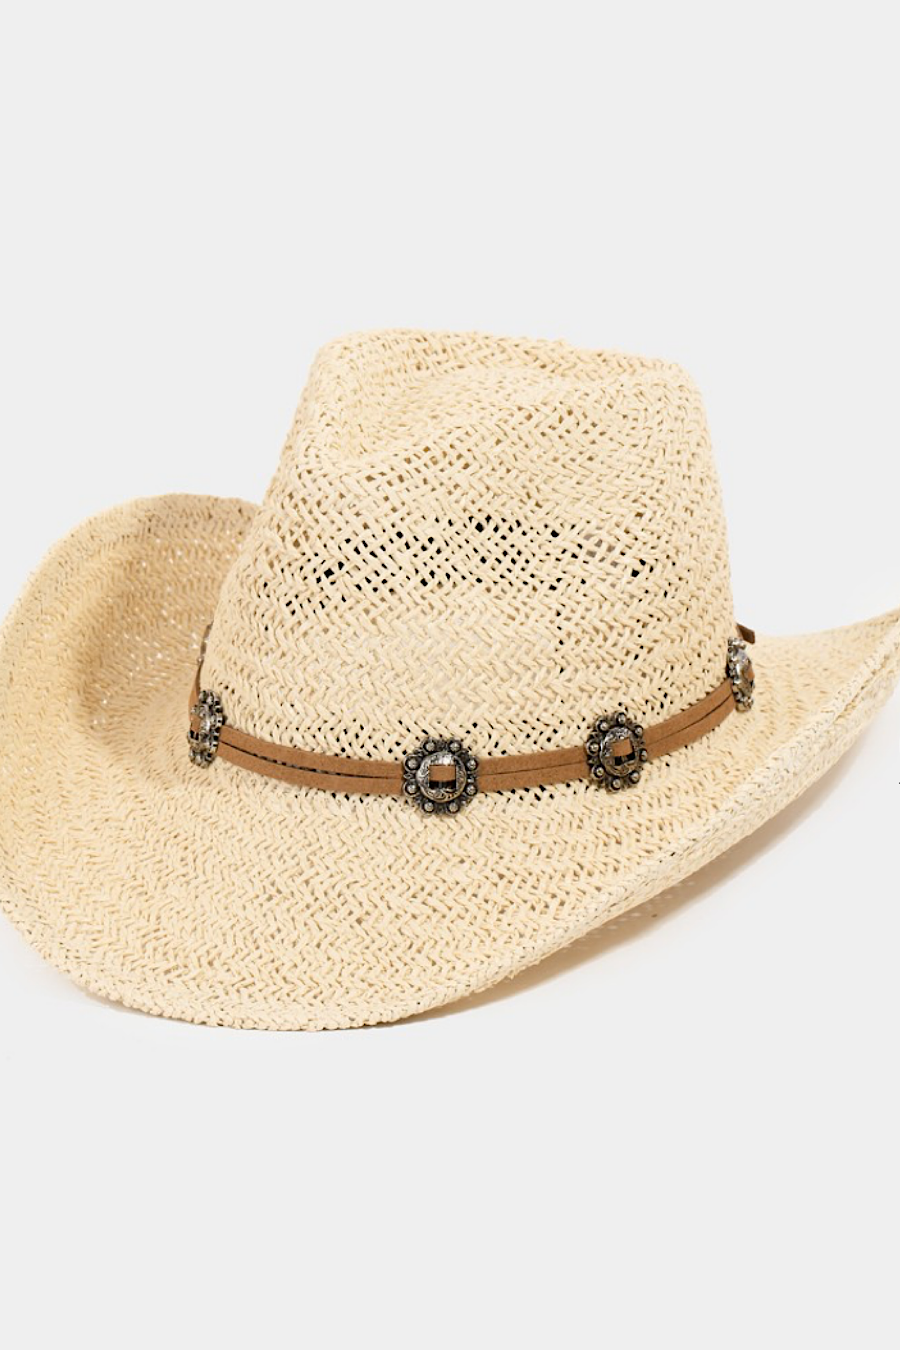 Straw Braided Cowboy Hat in 3 Colors!